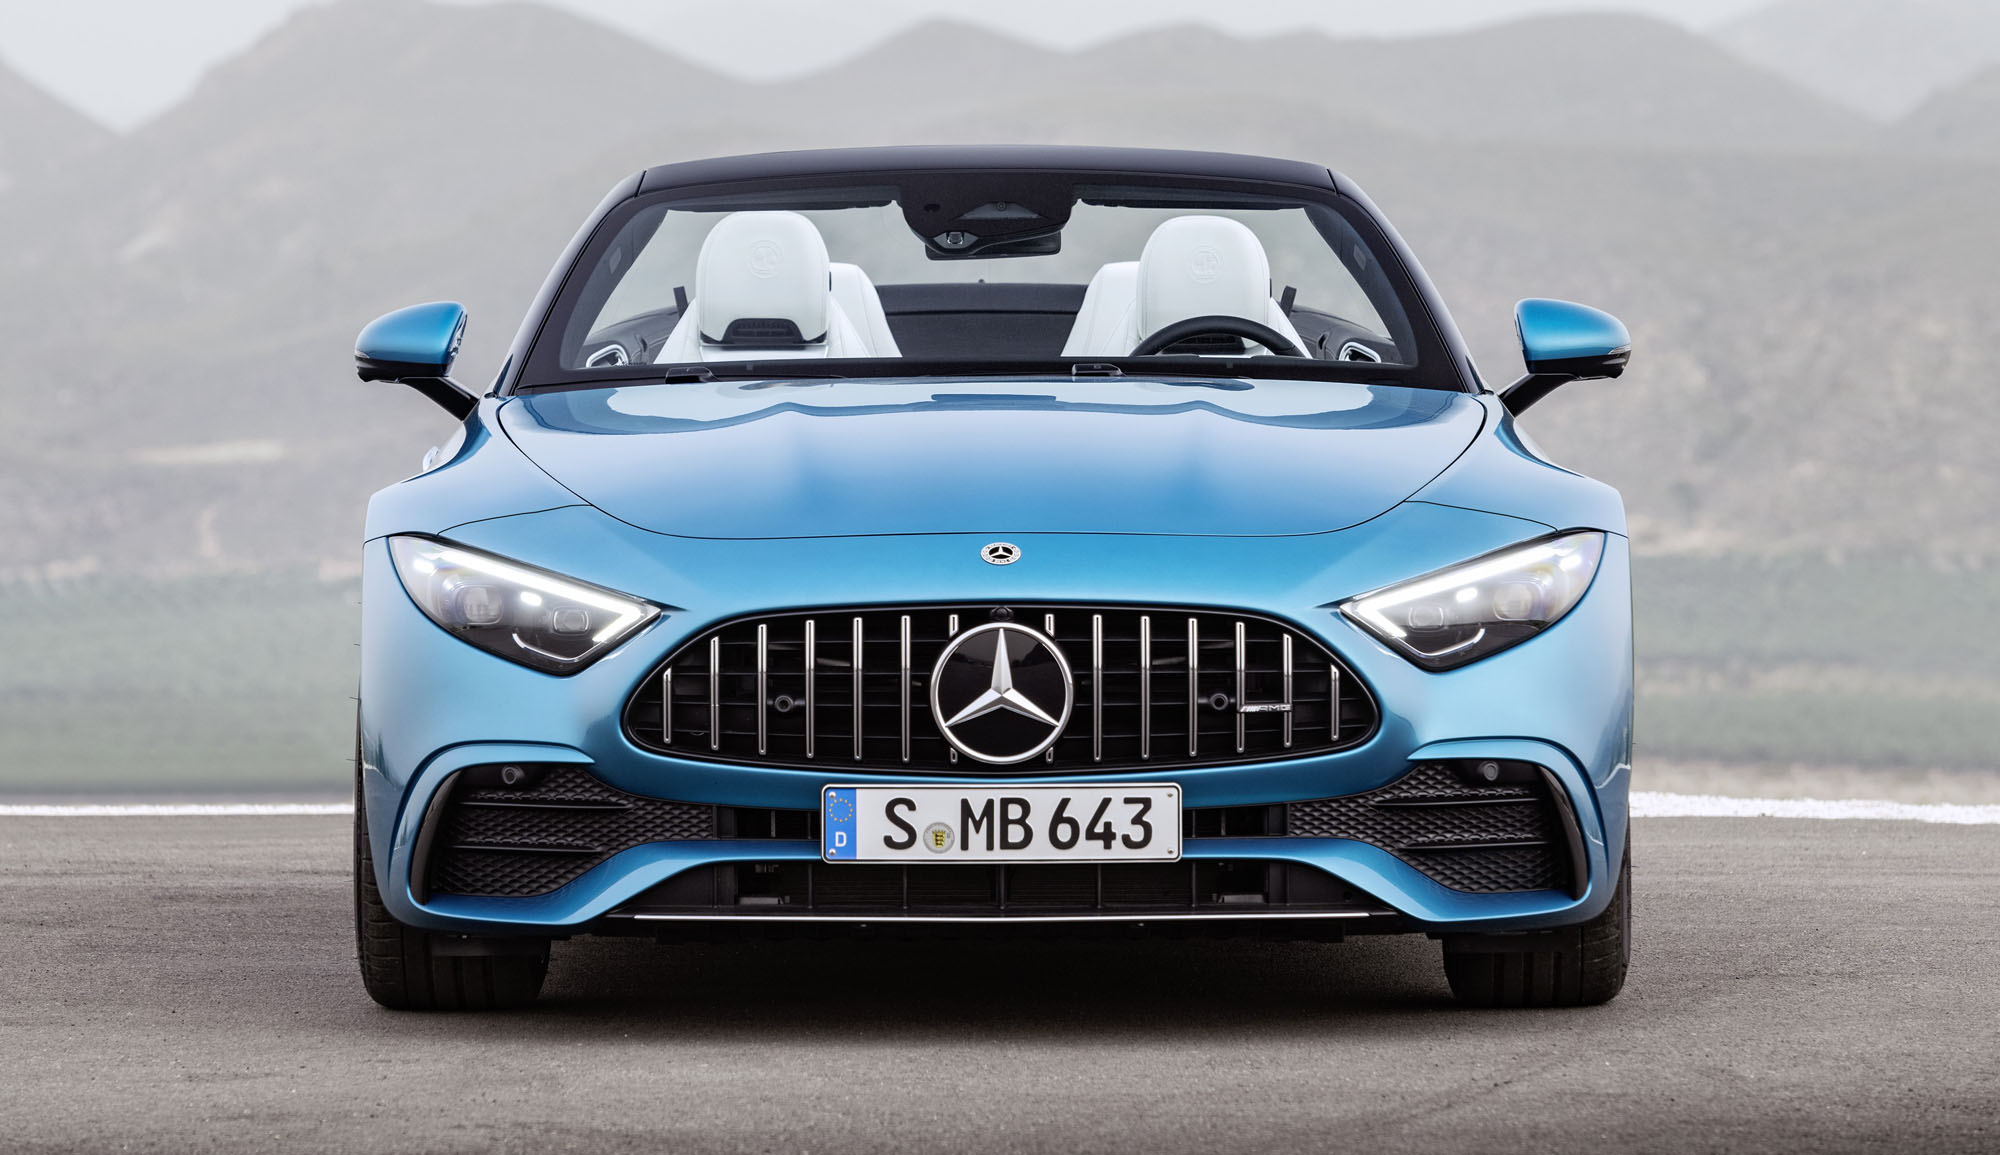 mercedes-amg, mercedes-amg gt, mercedes-benz, mercedes-maybach, monterey car week, pebble beach, mercedes-benz is revealing 2 new cars in the next 2 days – the details